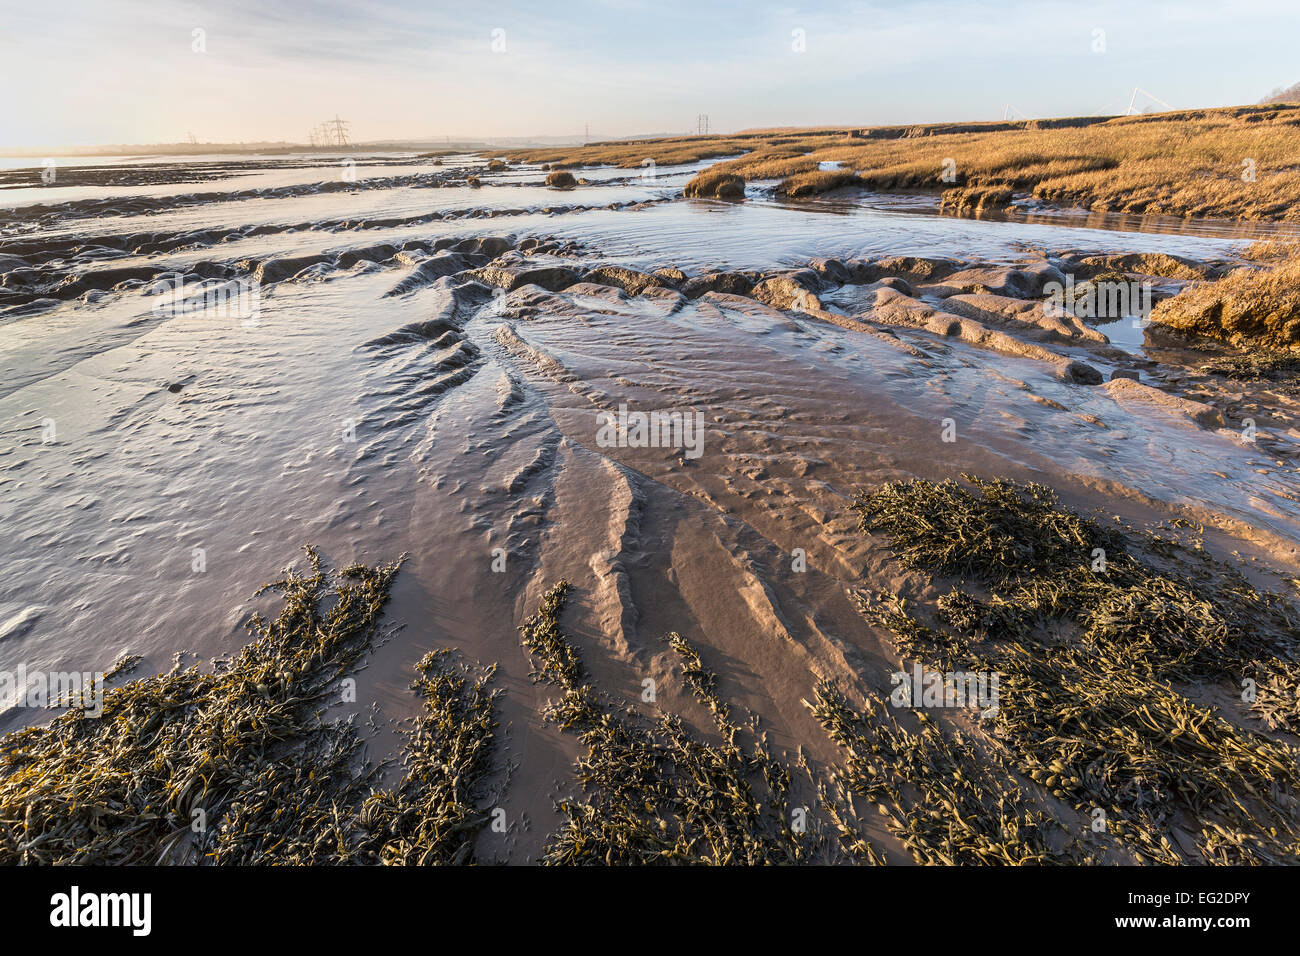 Mud flats and salt marsh at low tide, Beachley Point, River Severn, Gloucestershire, England, UK Stock Photo